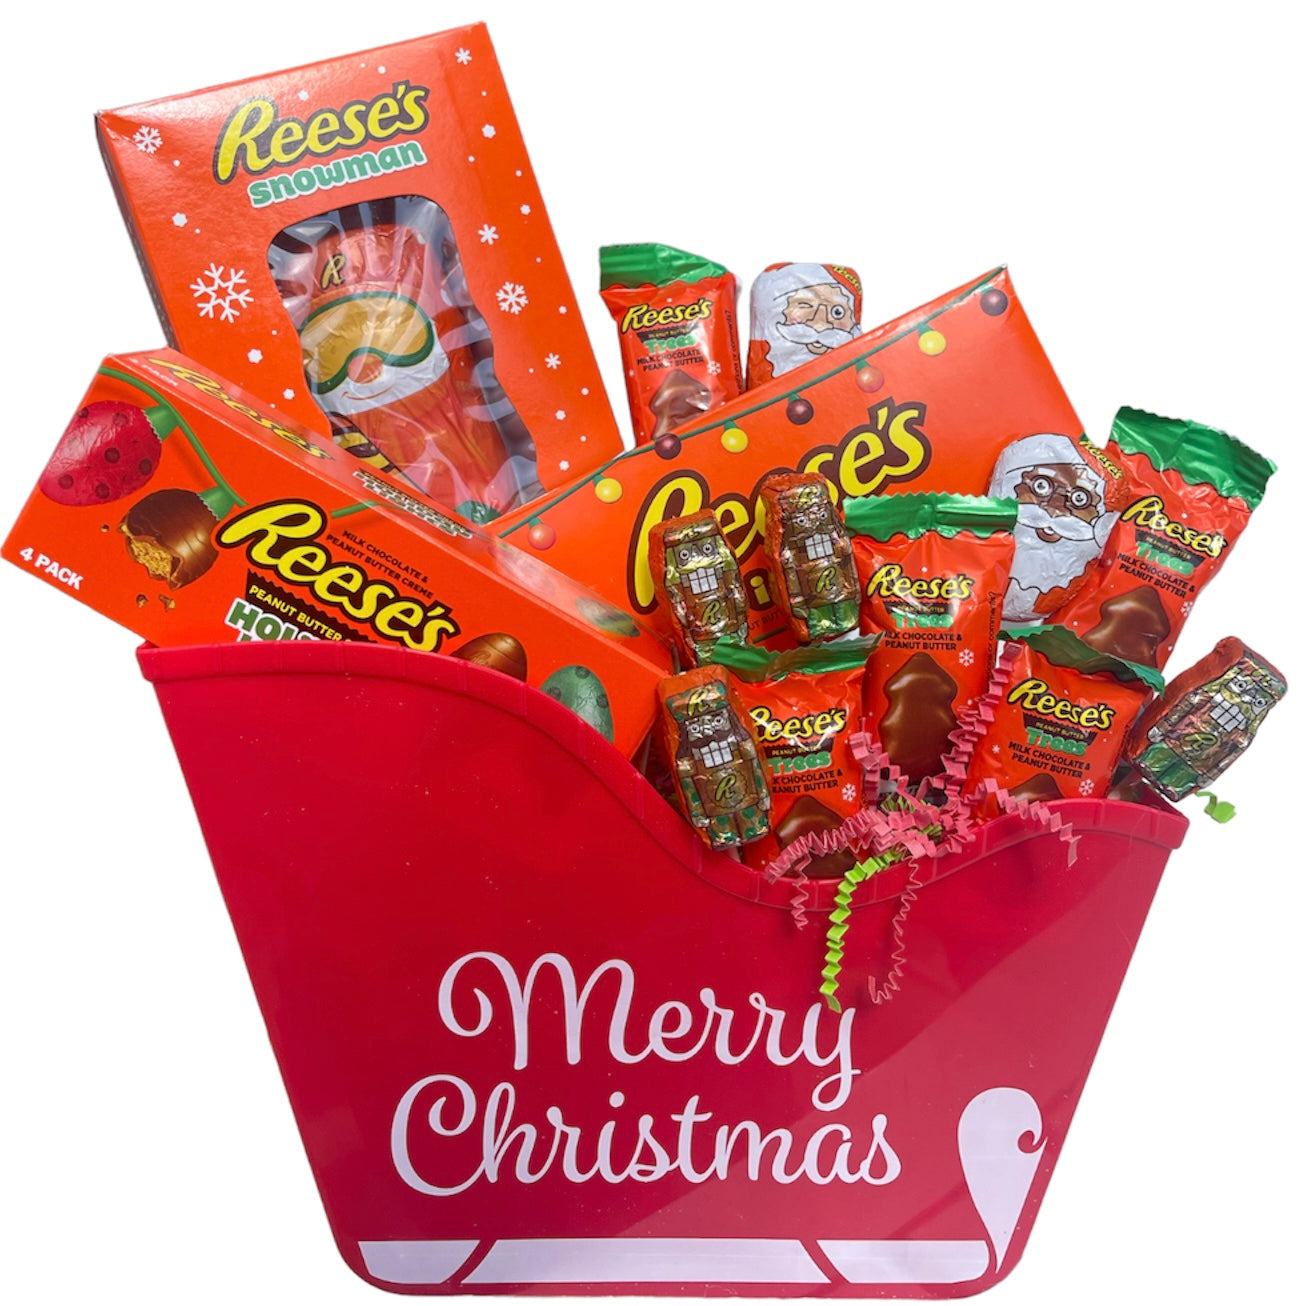 Reese’s Lovers Christmas Gift Basket